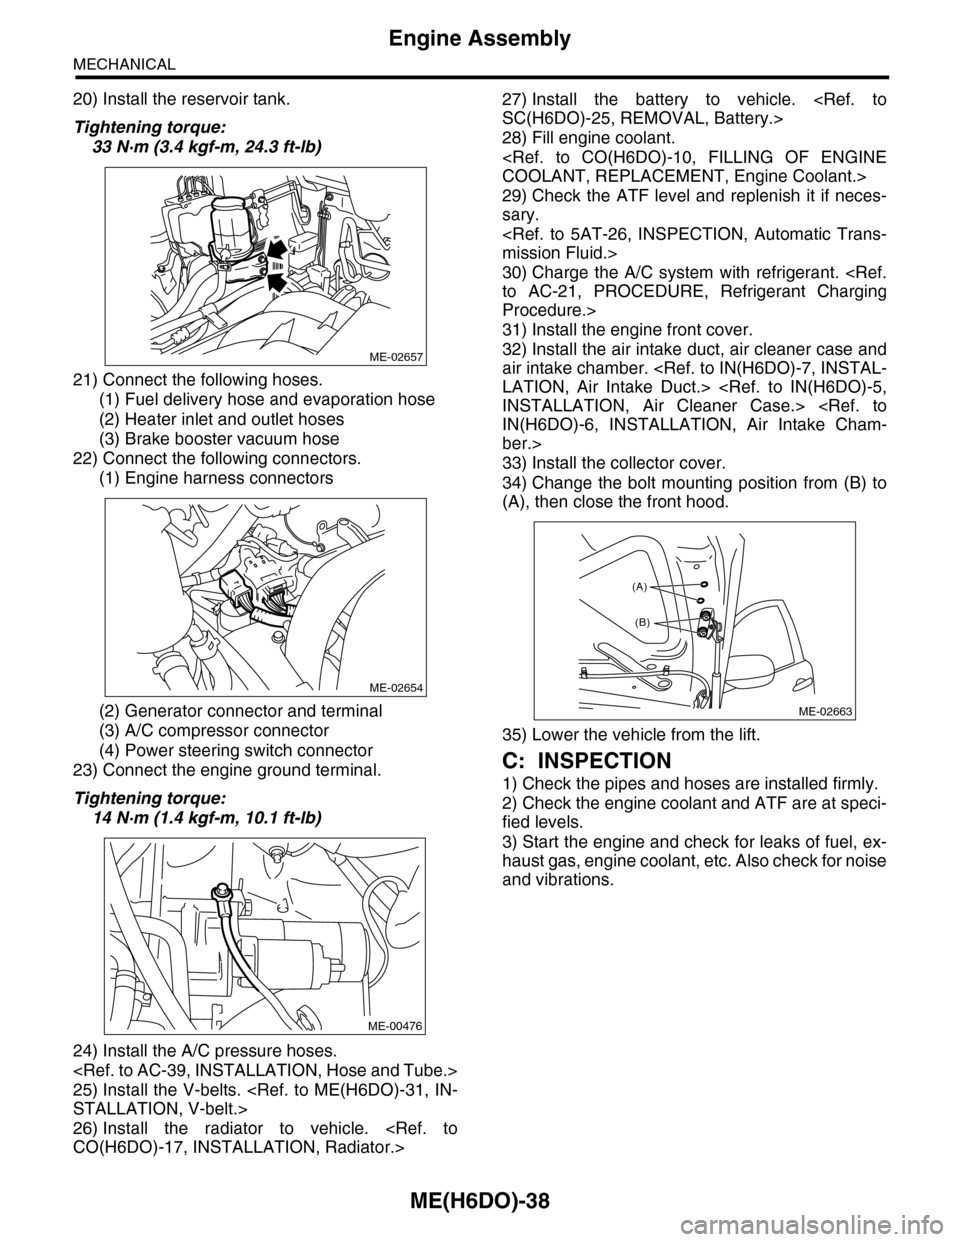 SUBARU TRIBECA 2009 1.G Service Workshop Manual ME(H6DO)-38
Engine Assembly
MECHANICAL
20) Install the reservoir tank.
Tightening torque:
33 N·m (3.4 kgf-m, 24.3 ft-lb) 
21) Connect the following hoses.
(1) Fuel delivery hose and evaporation hose
